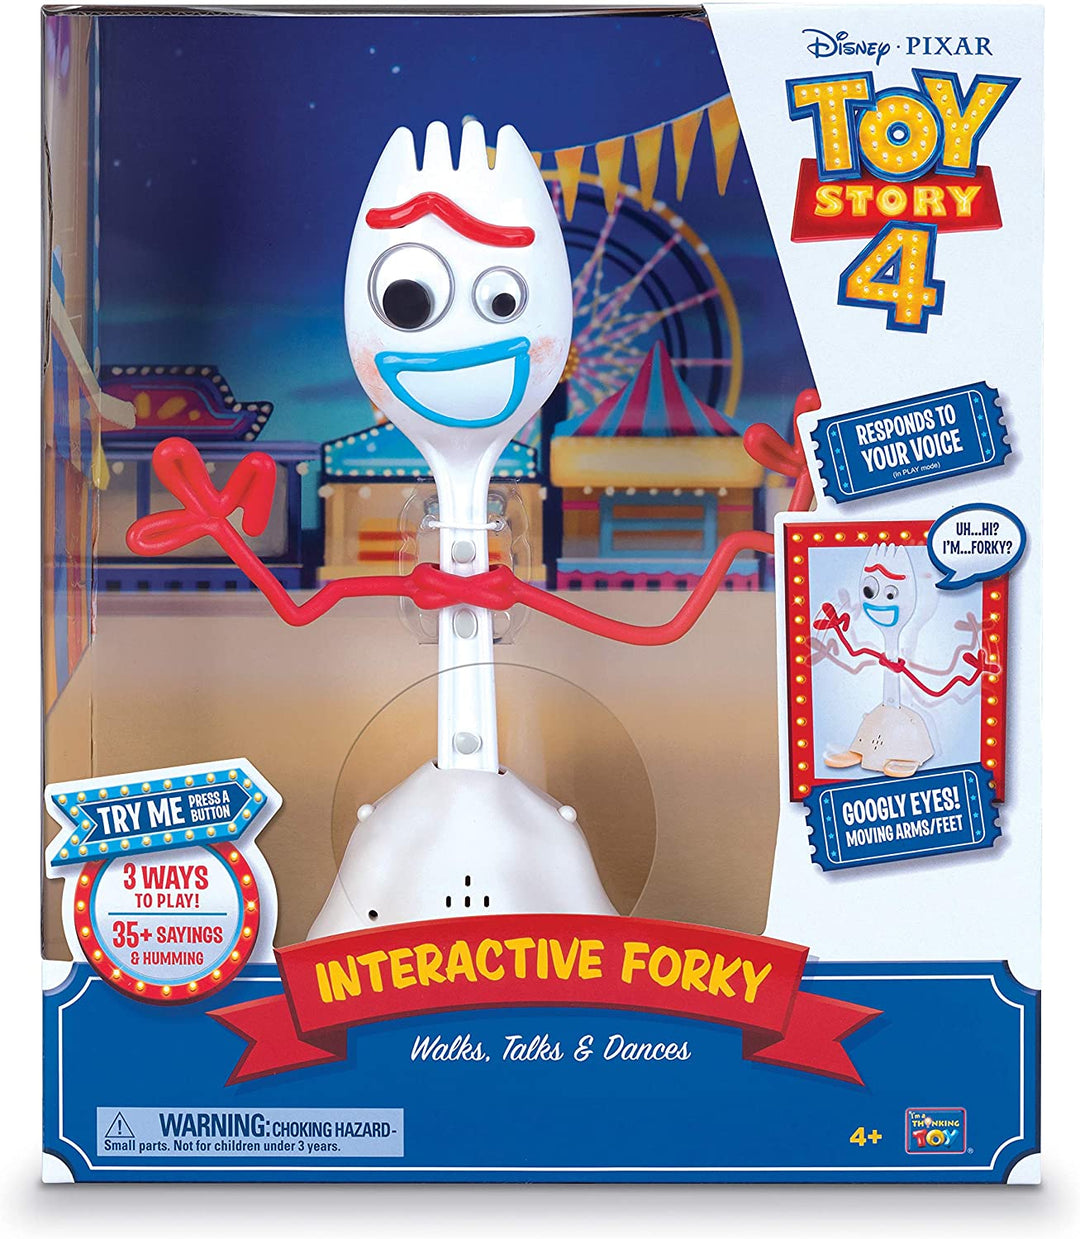 Toy Story 4 - Interactive Forky